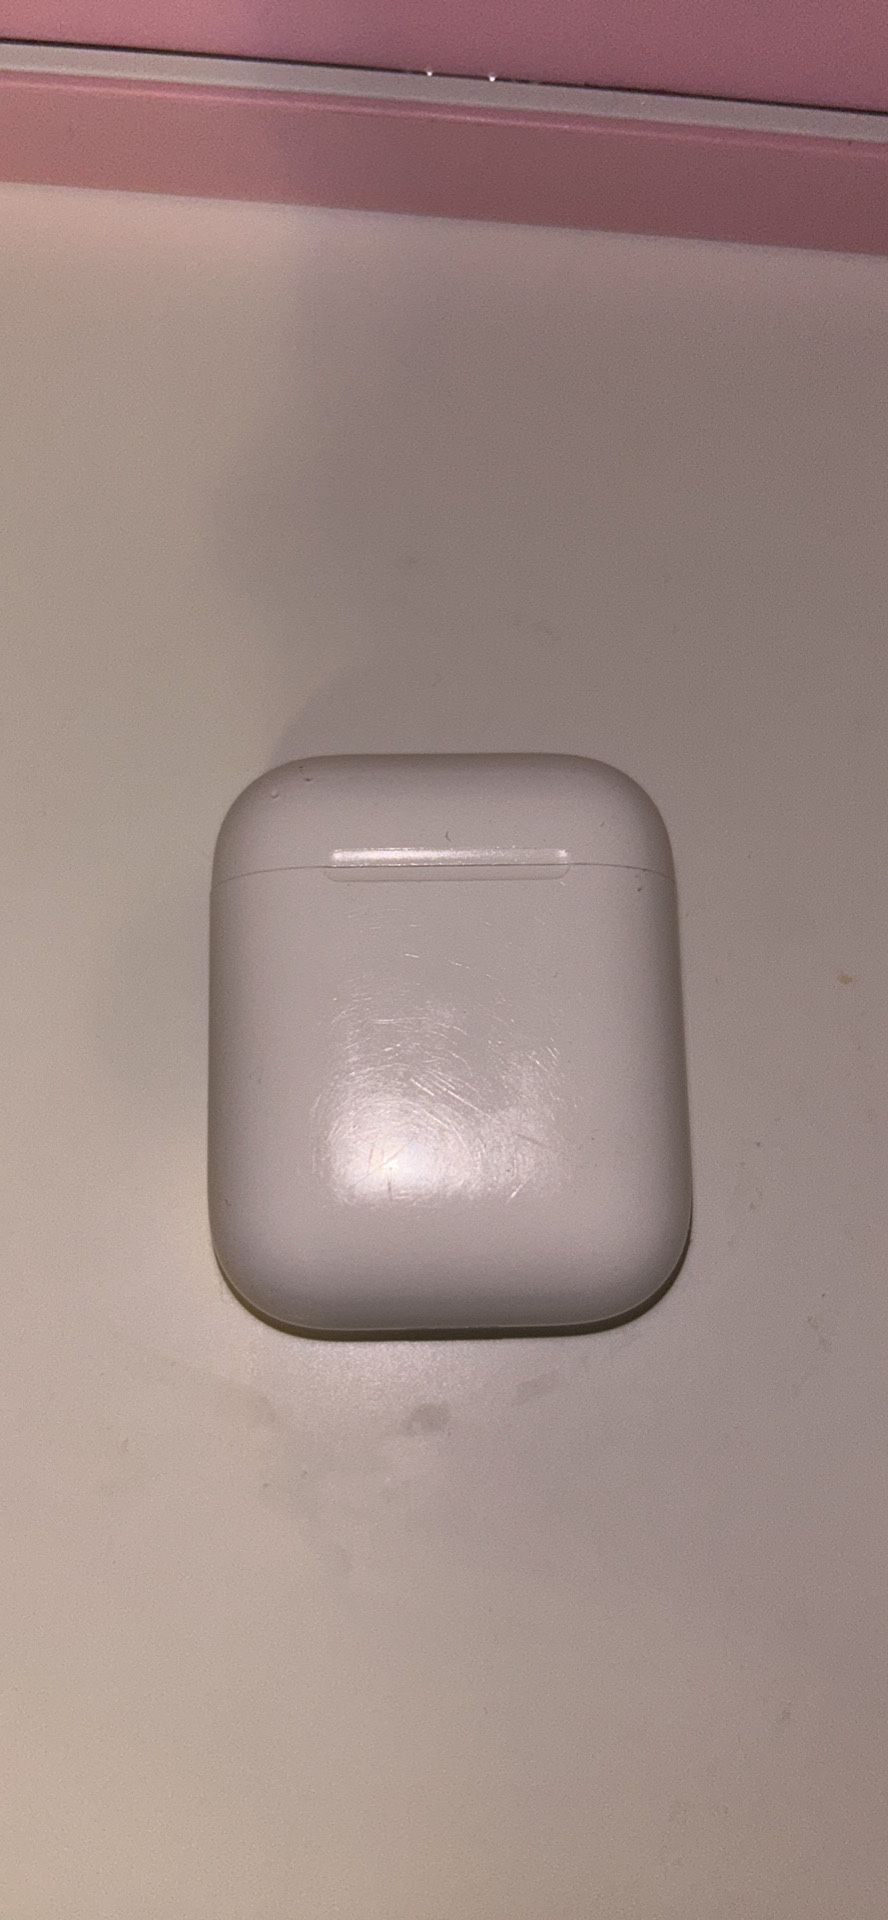 AirPods Case (only Case)